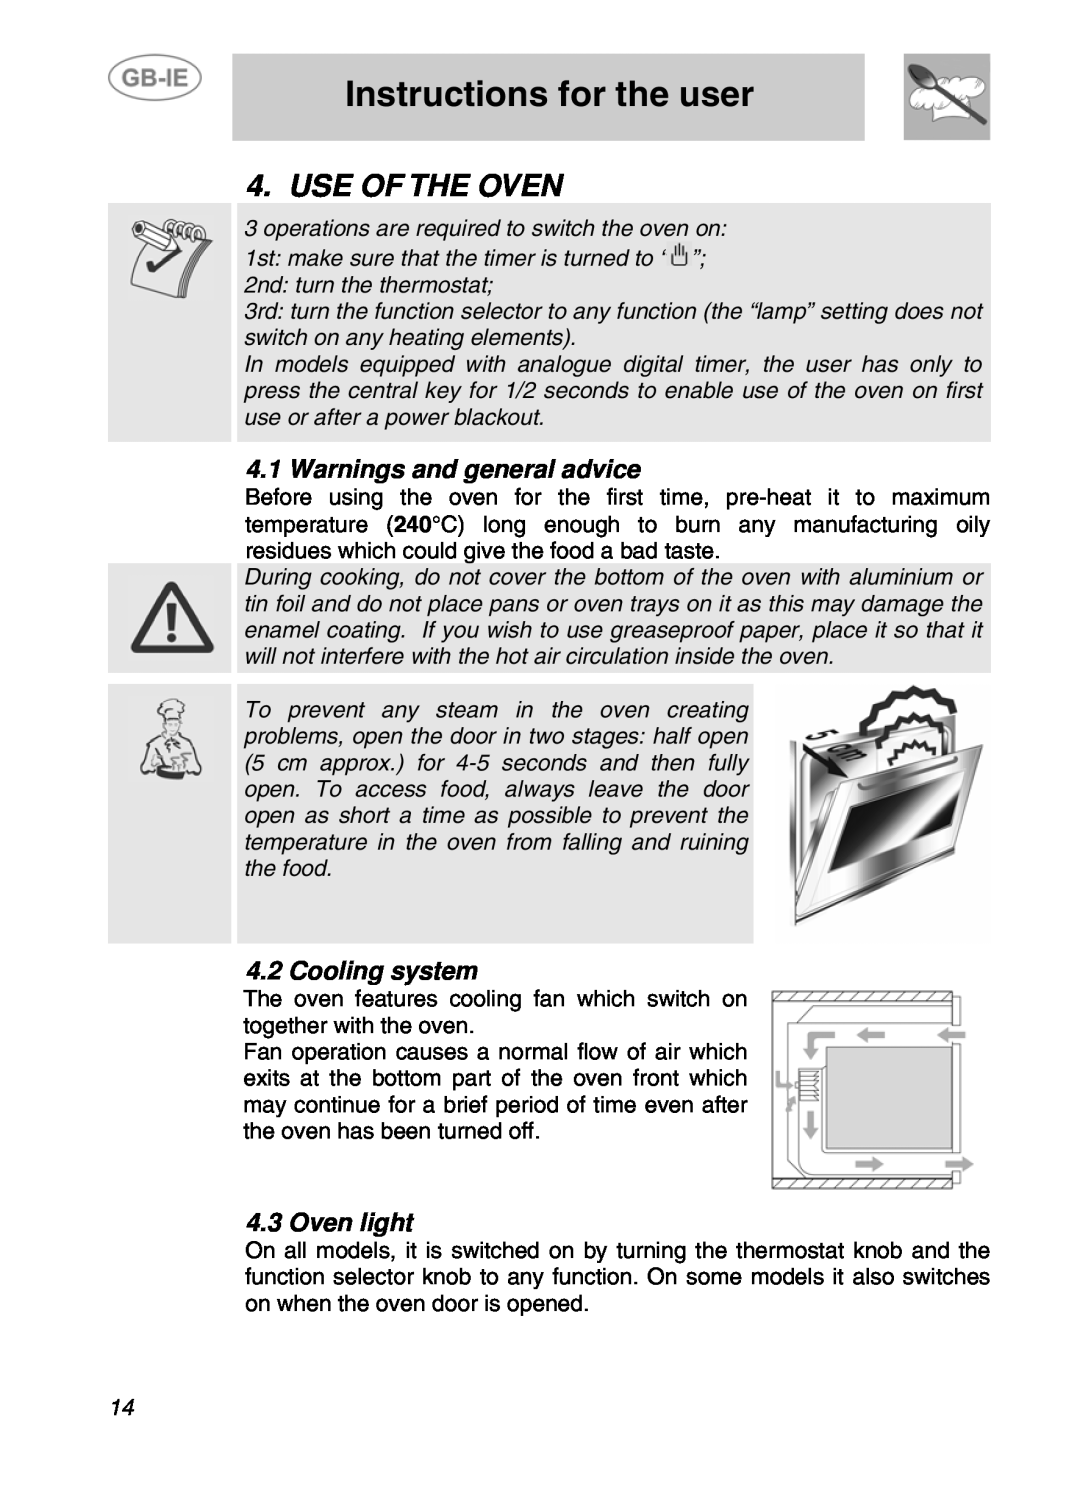 Smeg F170K-5 manual Use Of The Oven, Warnings and general advice, Cooling system, Oven light, Instructions for the user 